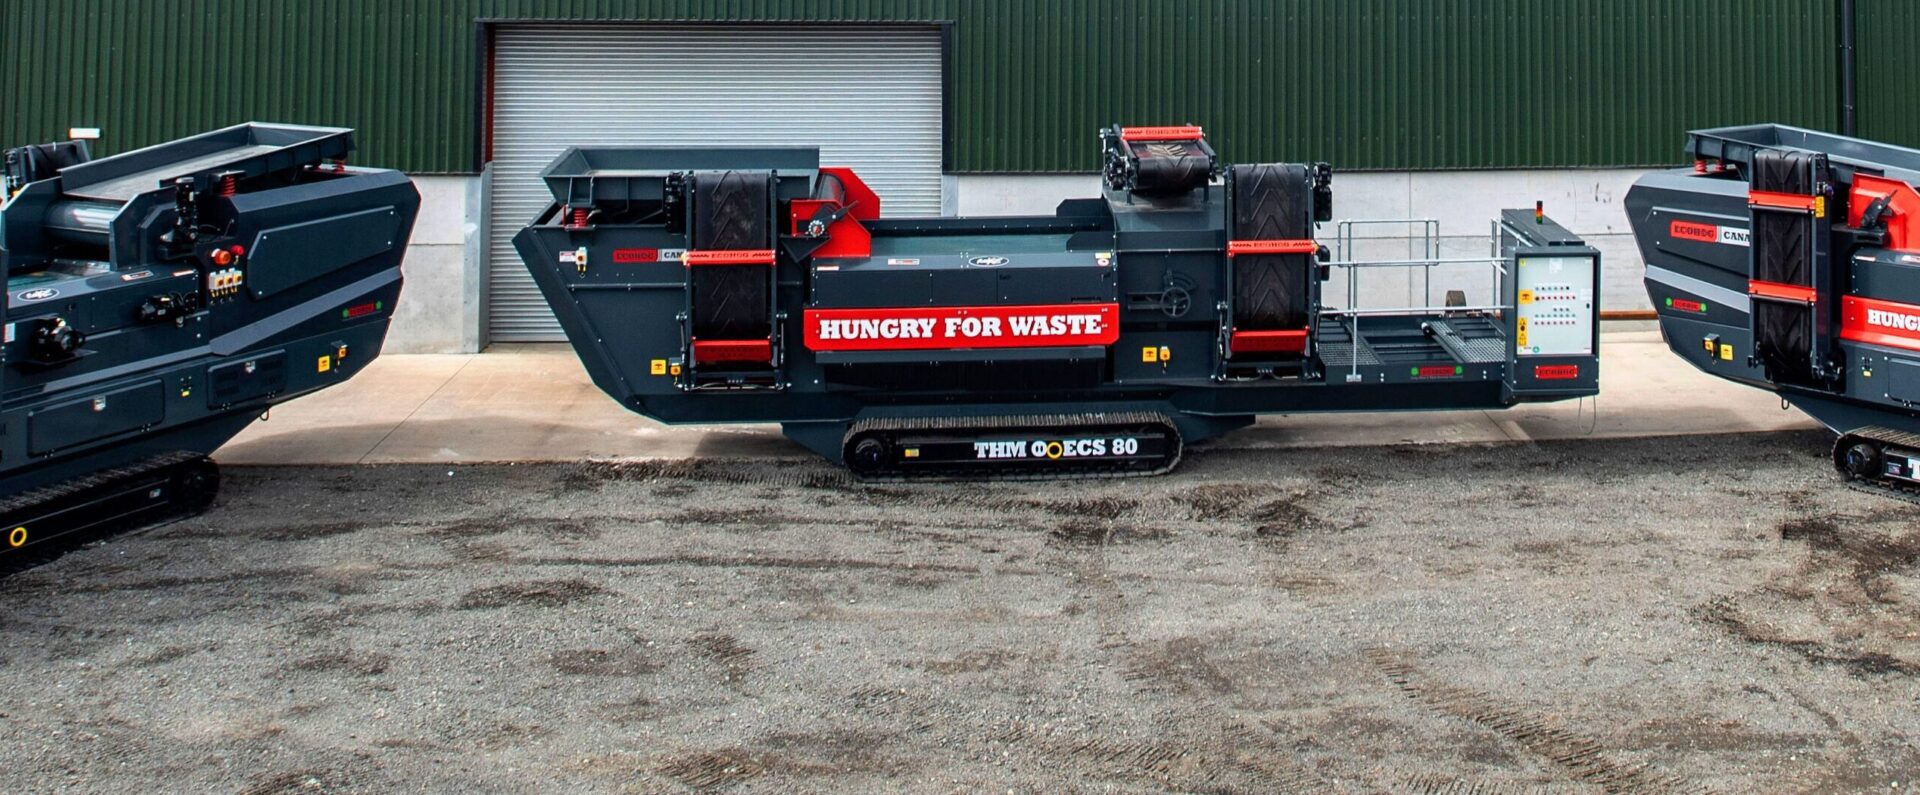 Eddy Current Separator by Ecohog - Experts in waste and scrap metal management equipment